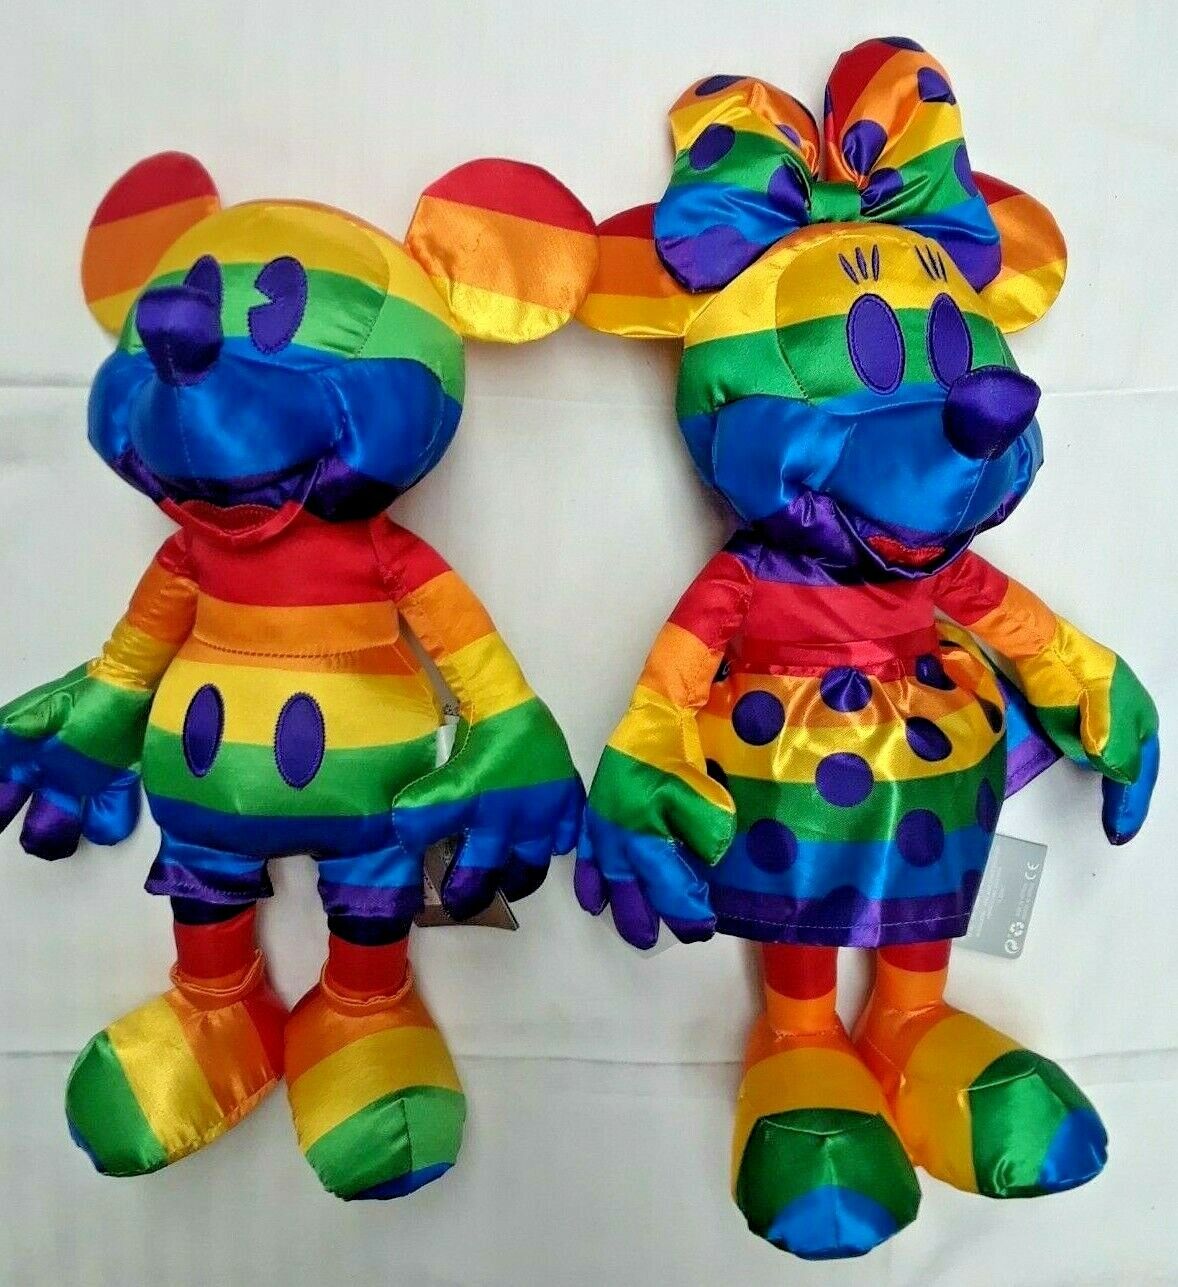 DISNEY STORE Authentic MICKEY & MINNIE MOUSE Rainbow Collection Plush 2pcs *New